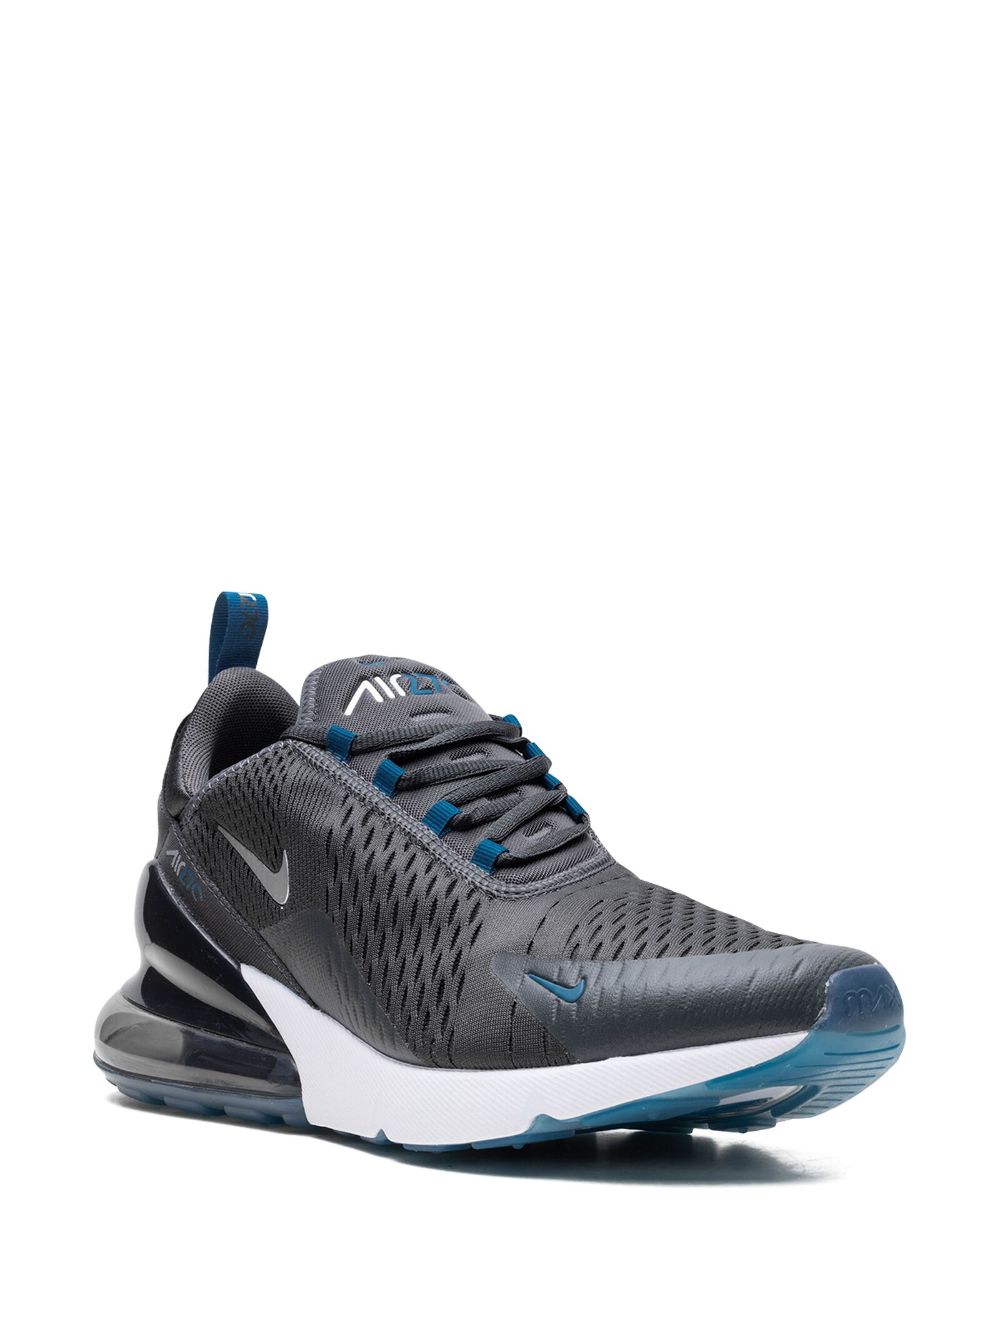 Image 2 of Nike Air Max 270 "Anthracite/Industrial Blue" sneakers